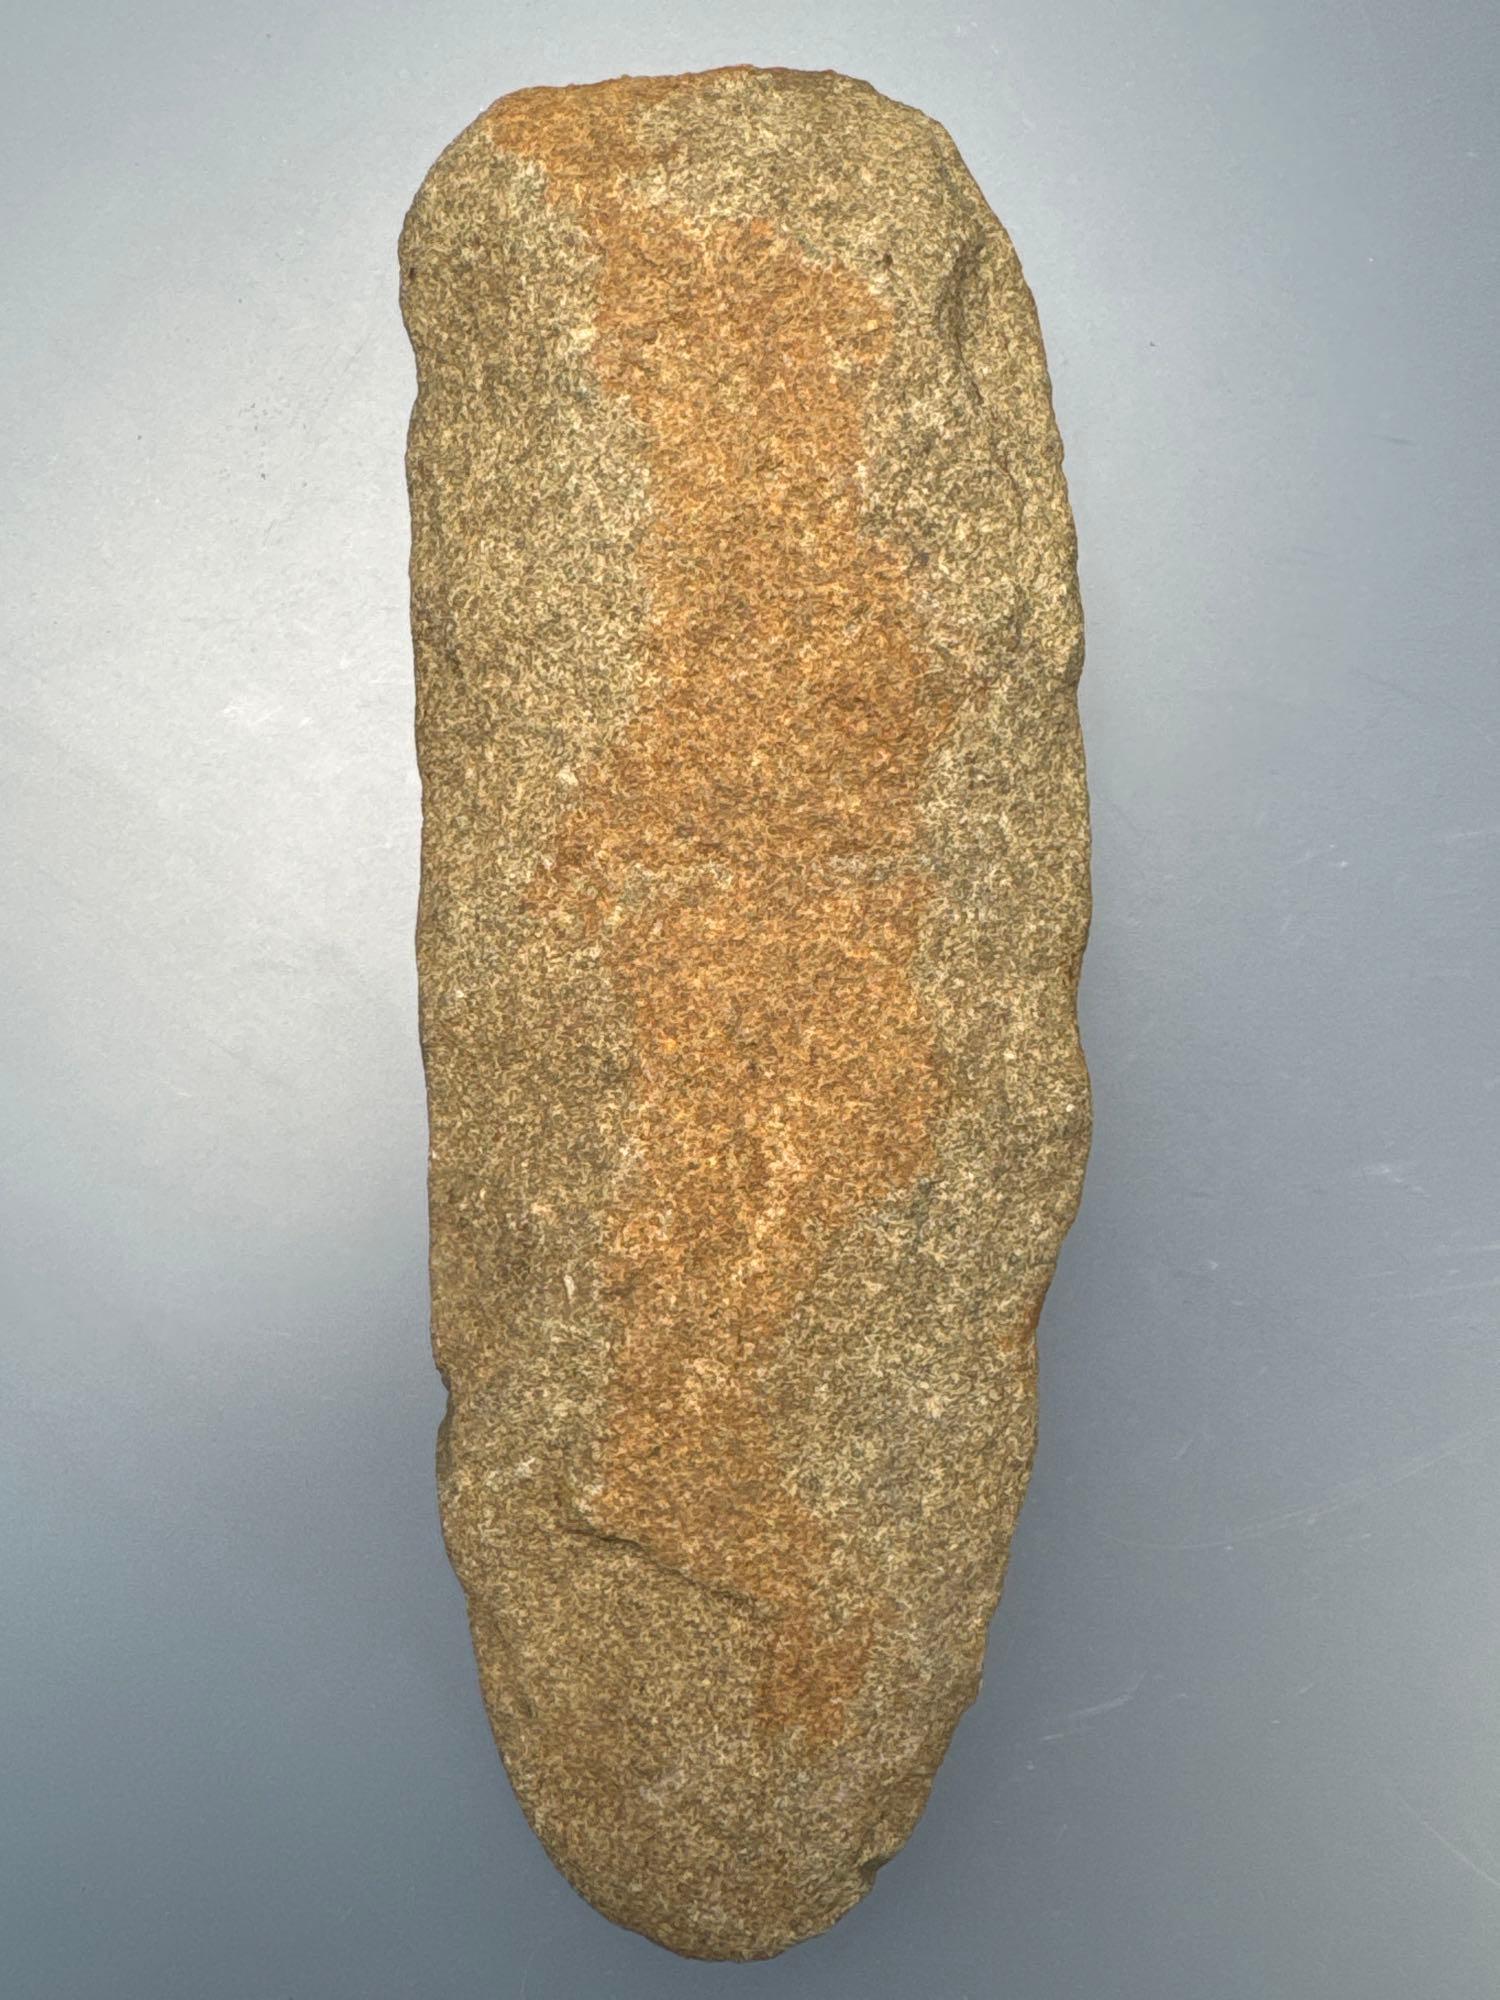 6 1/2" Soapstone Pick, Found along the Susquehanna River in PA, Ex: Kauffman Collection